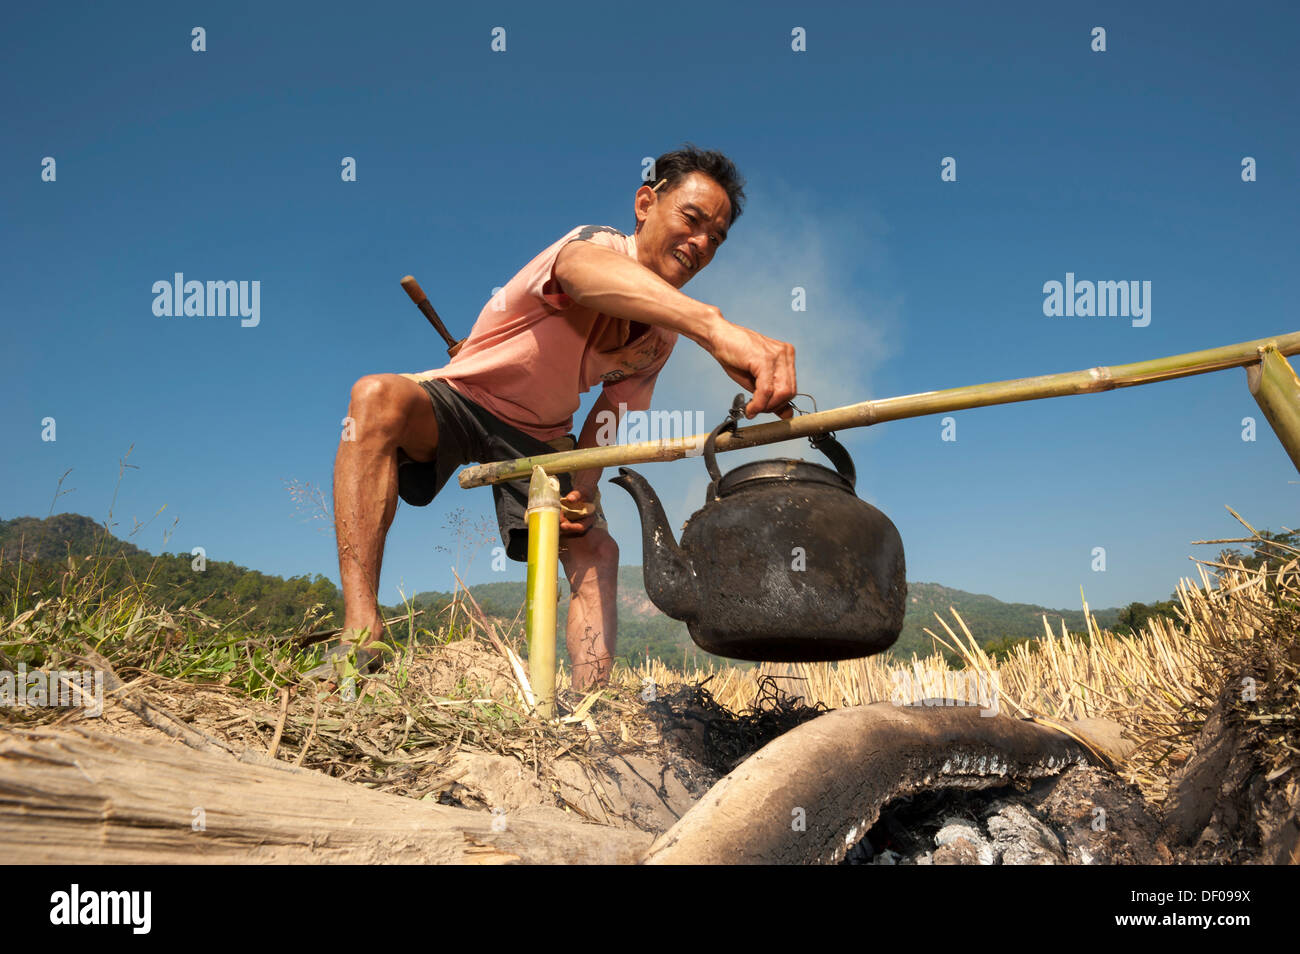 Man from the Shan or Thai Yai ethnic minority, is boiling water in an iron kettle, Soppong or Pang Mapha area, Northern Thailand Stock Photo